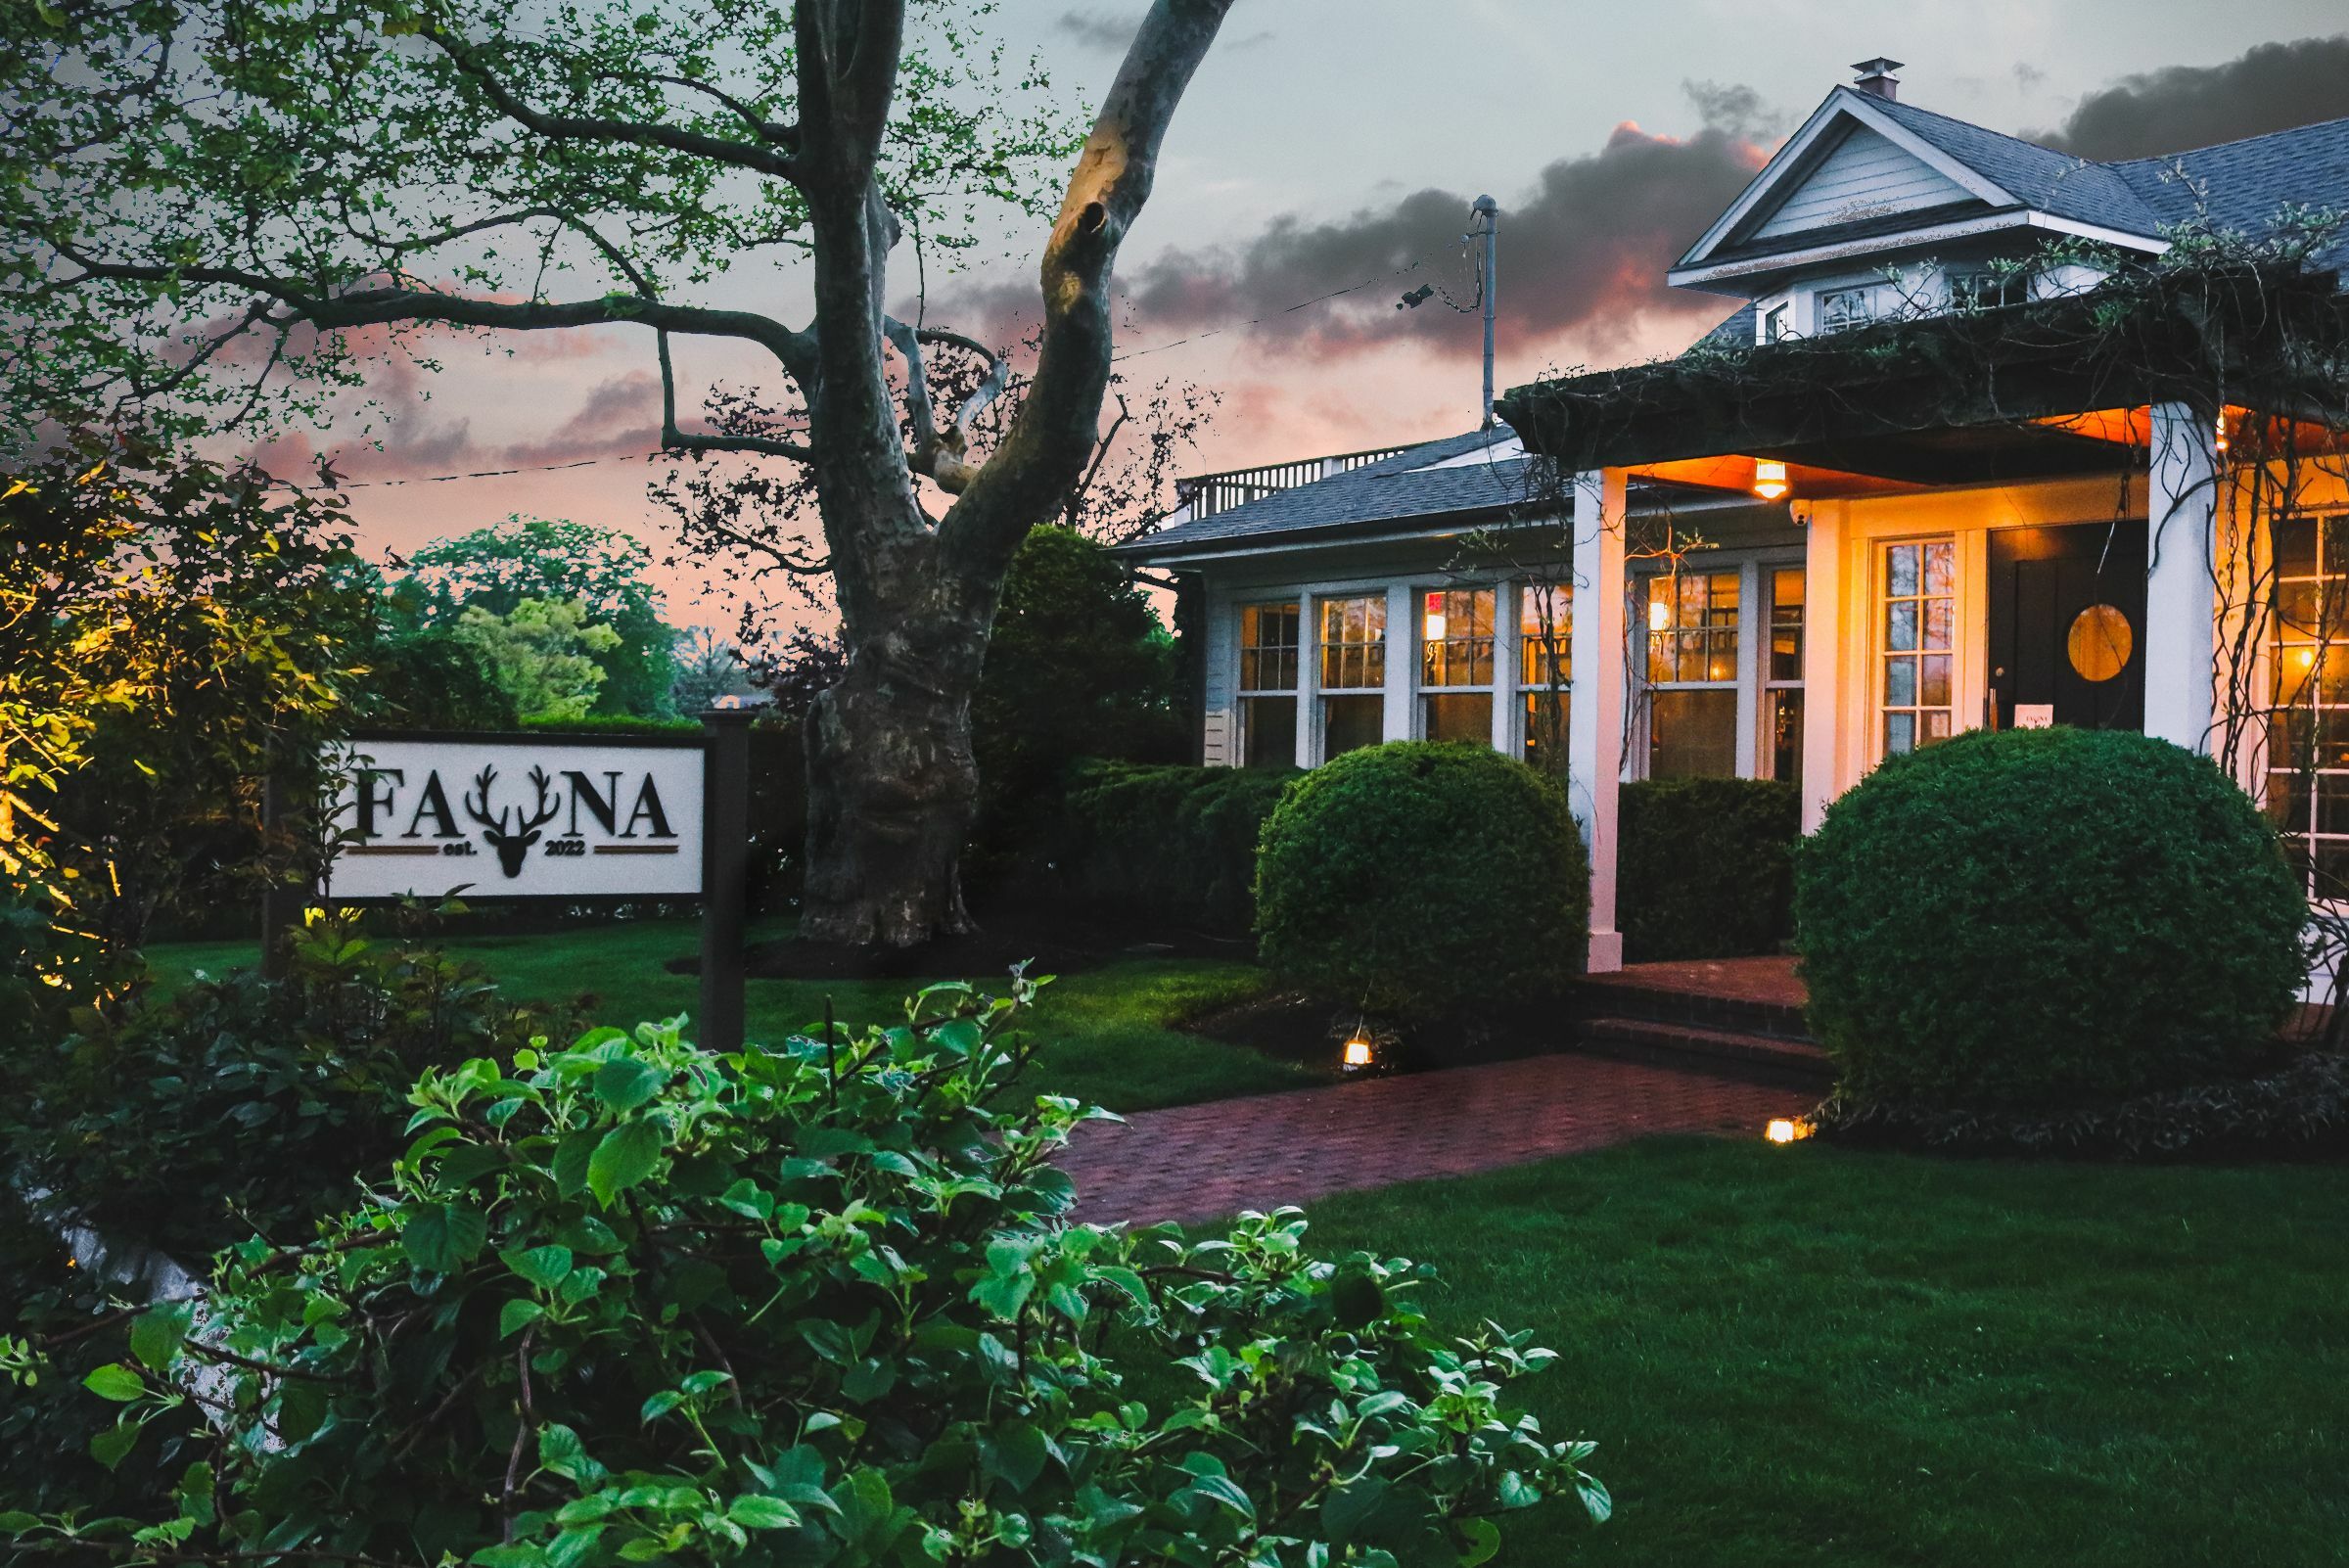 Fauna in Westhampton Beach is taking part in the winter Long Island Restaurant week which takes place from January 29 to February 5. COURTESY LONG ISLAND RESTAURANT WEEK